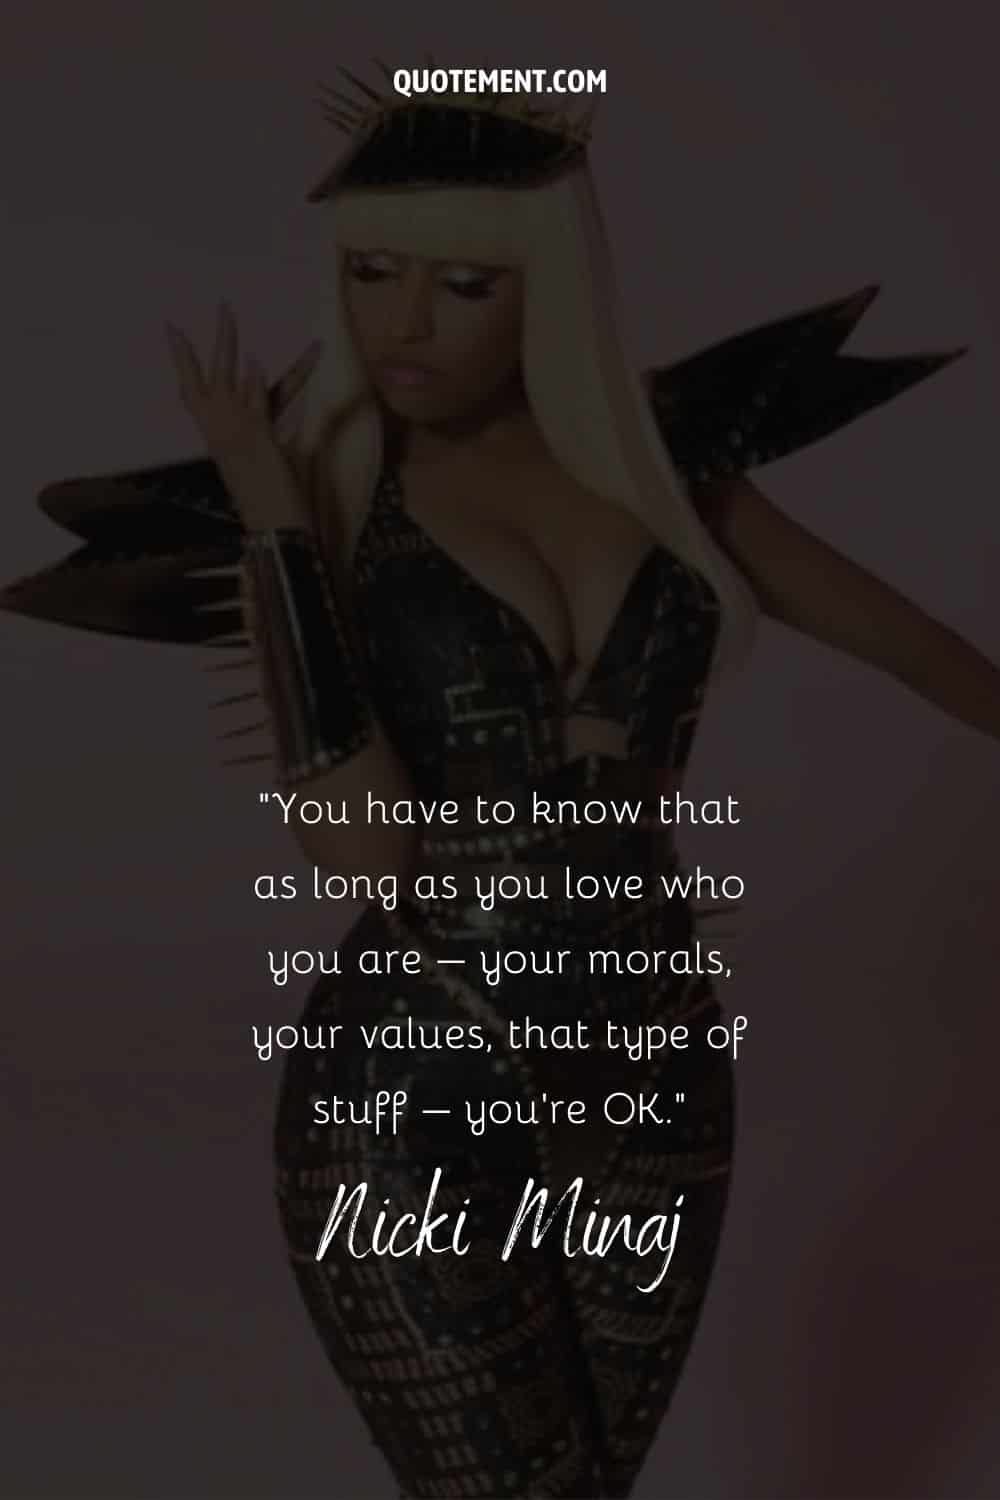 Inspirational and motivational quote by Nicki Minaj and her photo in the background as well